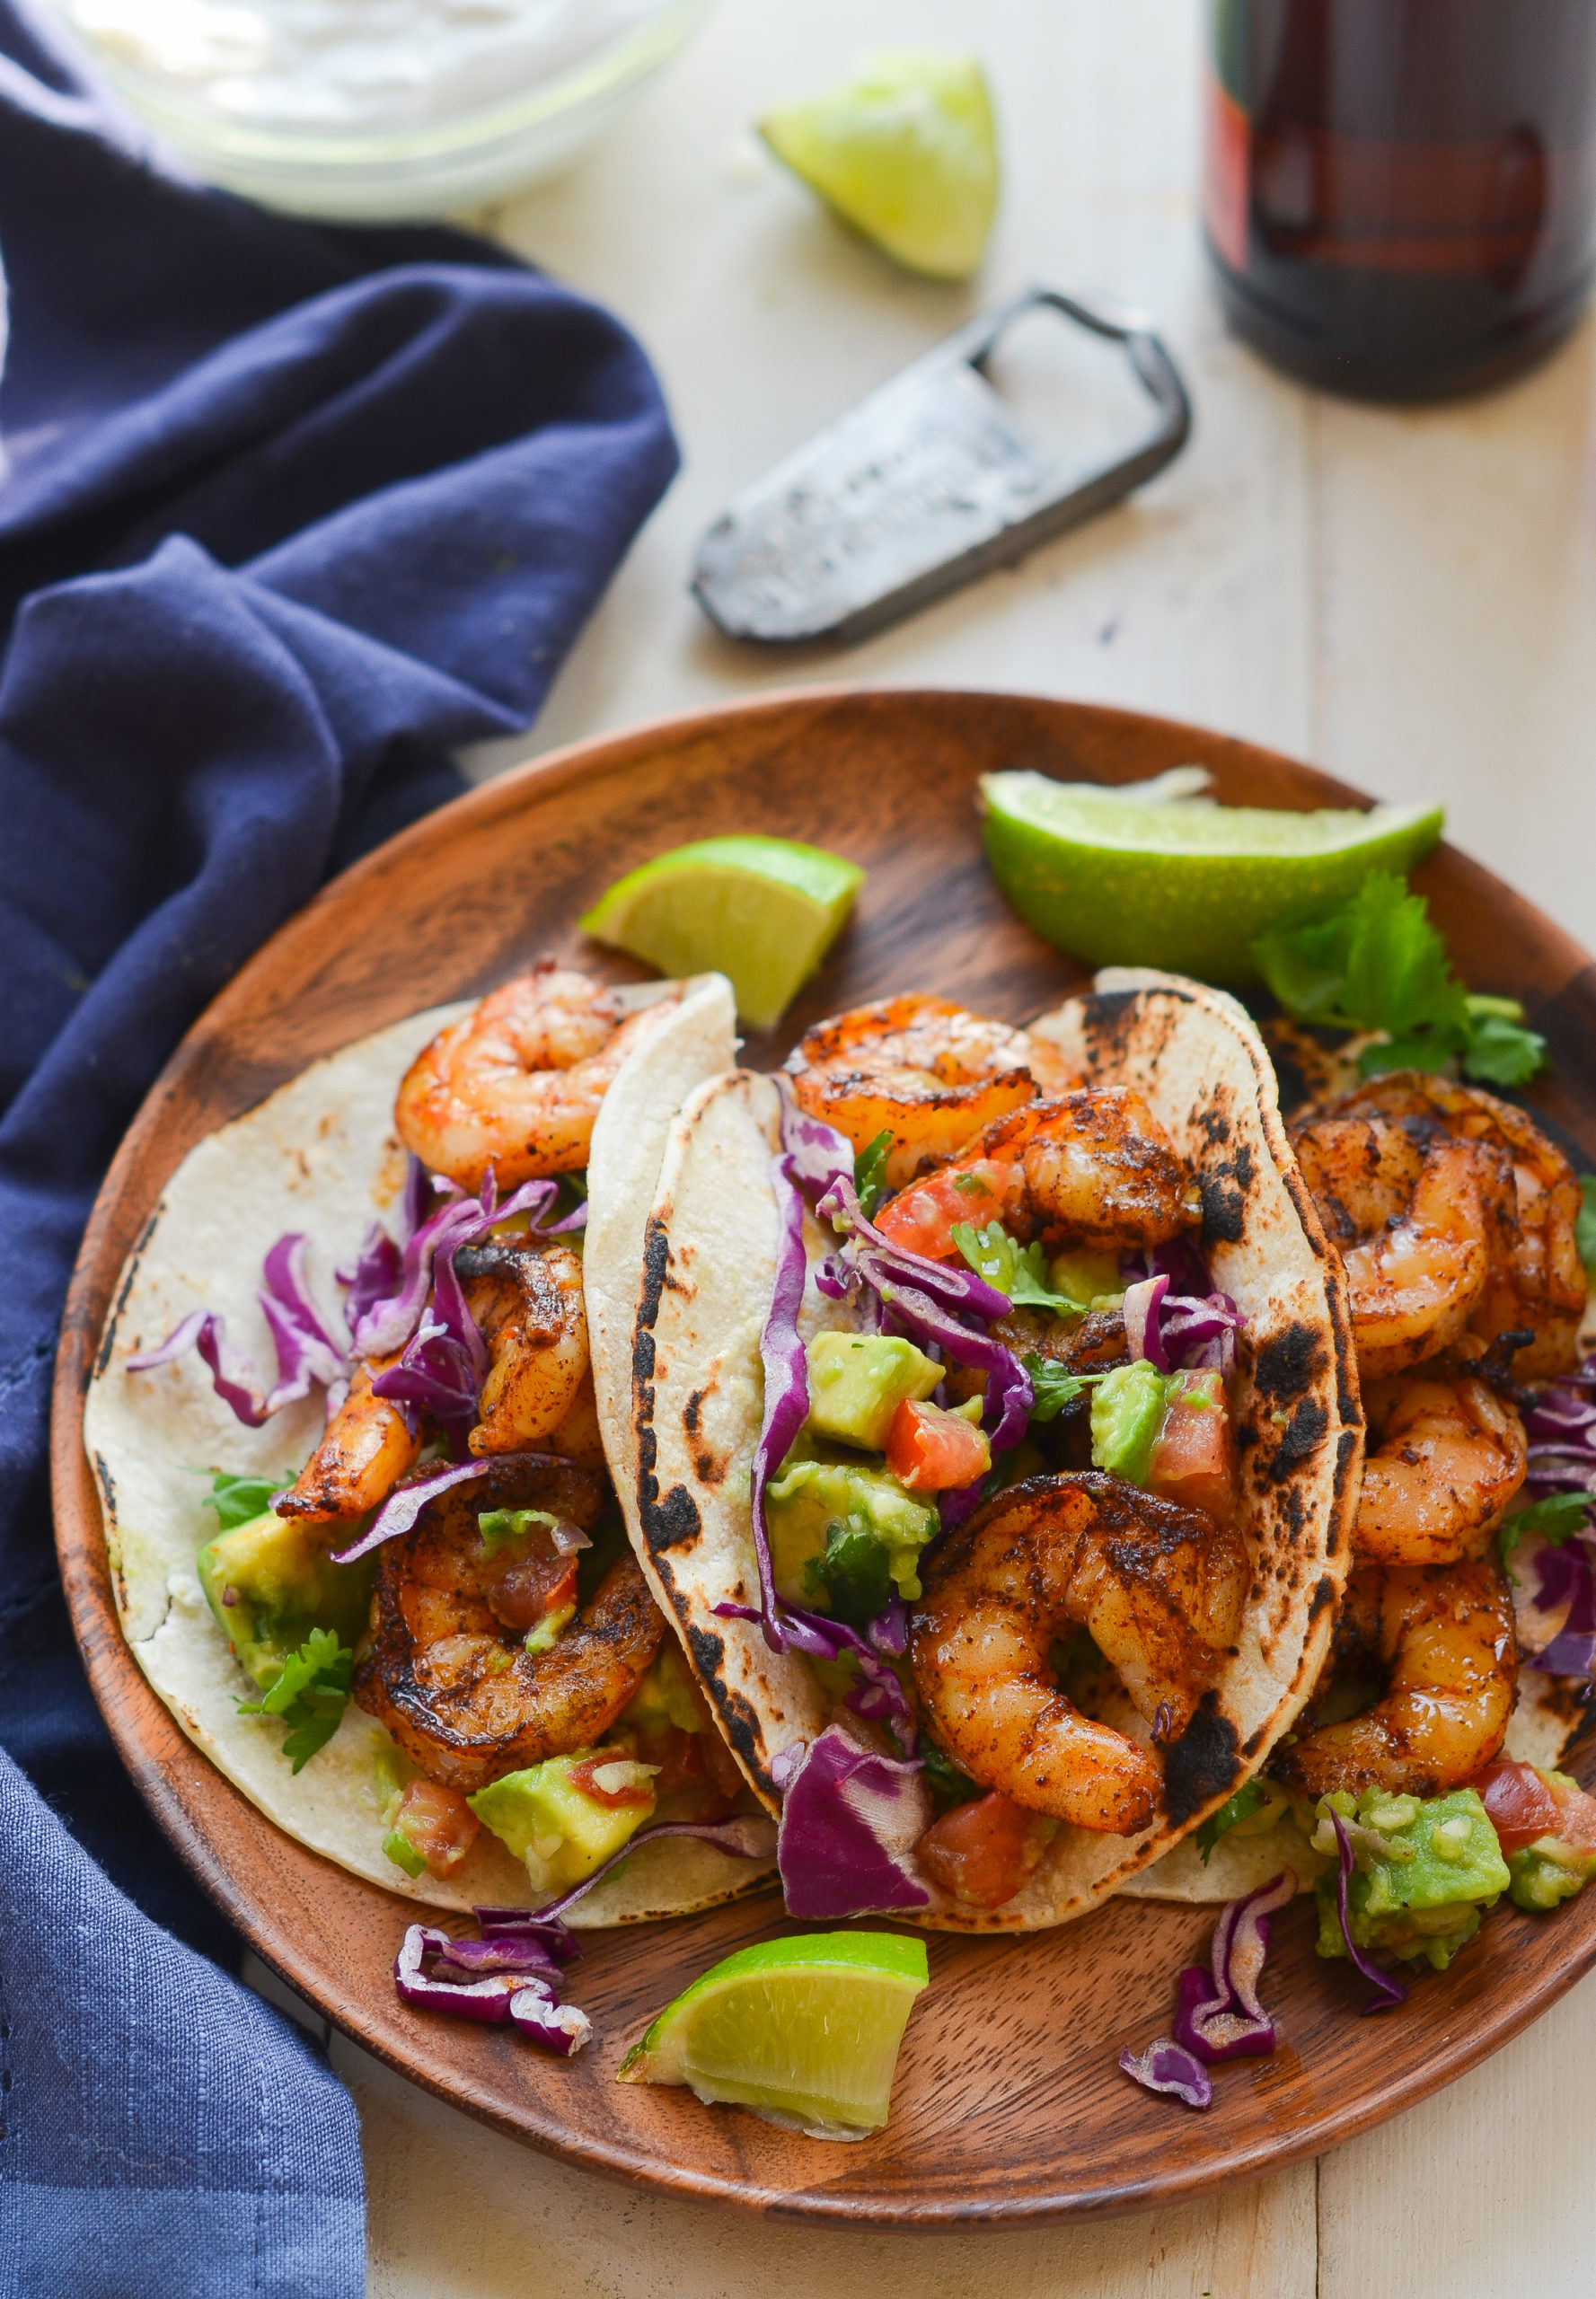 Grilled Shrimp Tacos With Avocado Salsa Once Upon A Chef,Hot Buttered Rum Mix